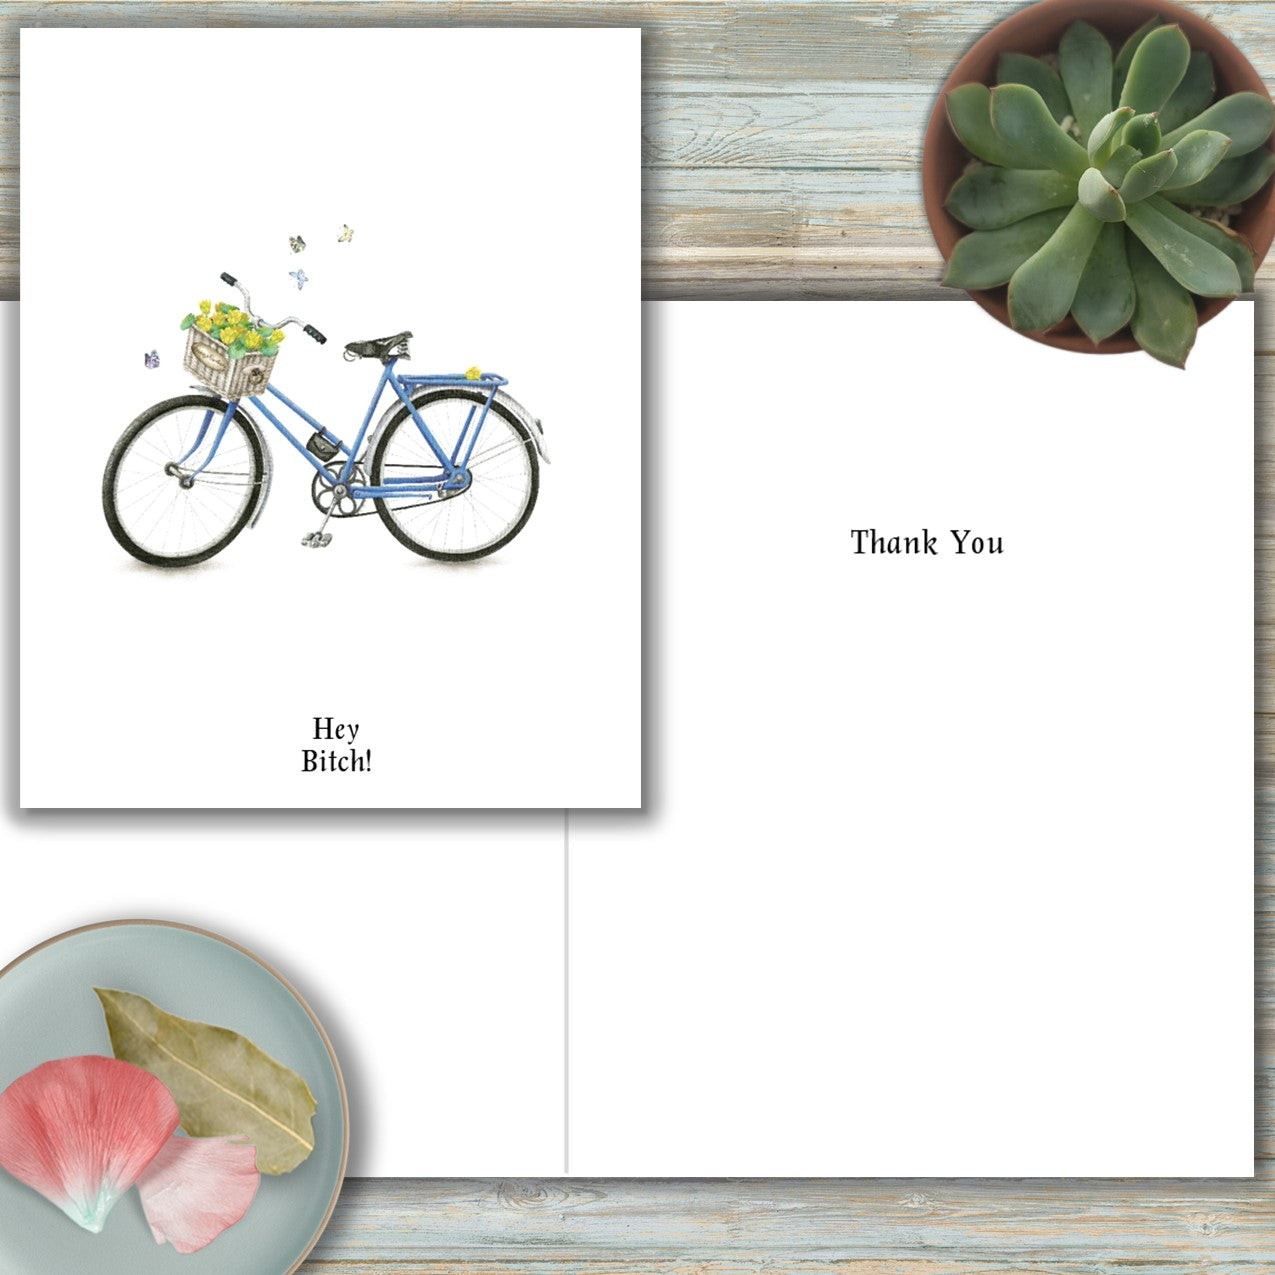 Thank You Card Wholesale